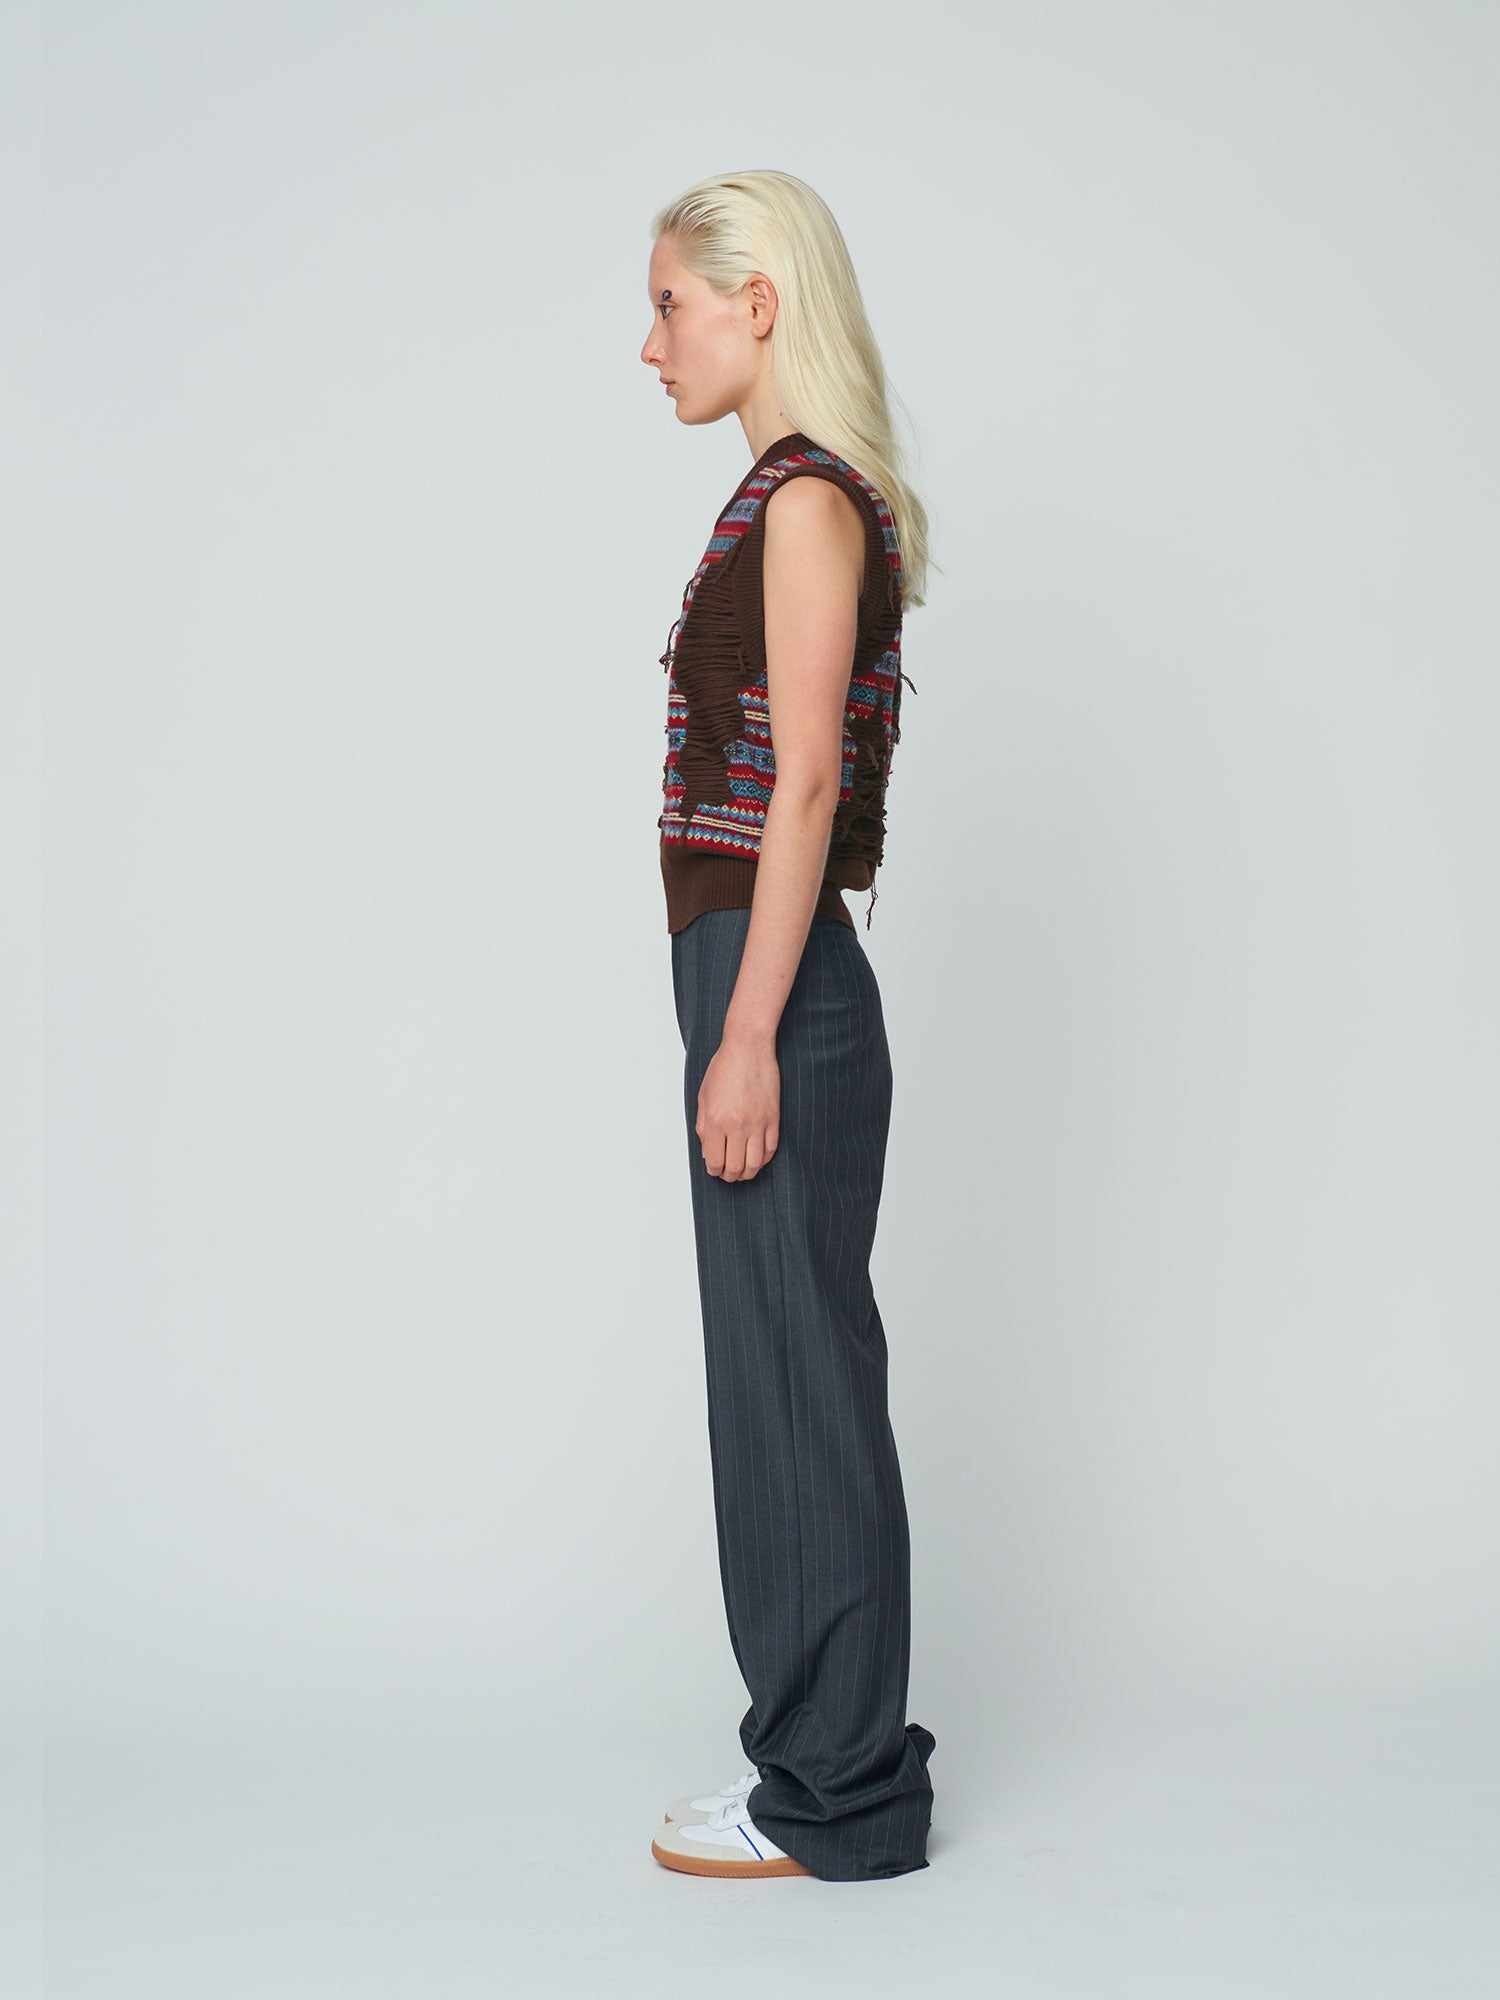 Róhe Pippa Pants in Cold Grey | WE ARE ICONIC